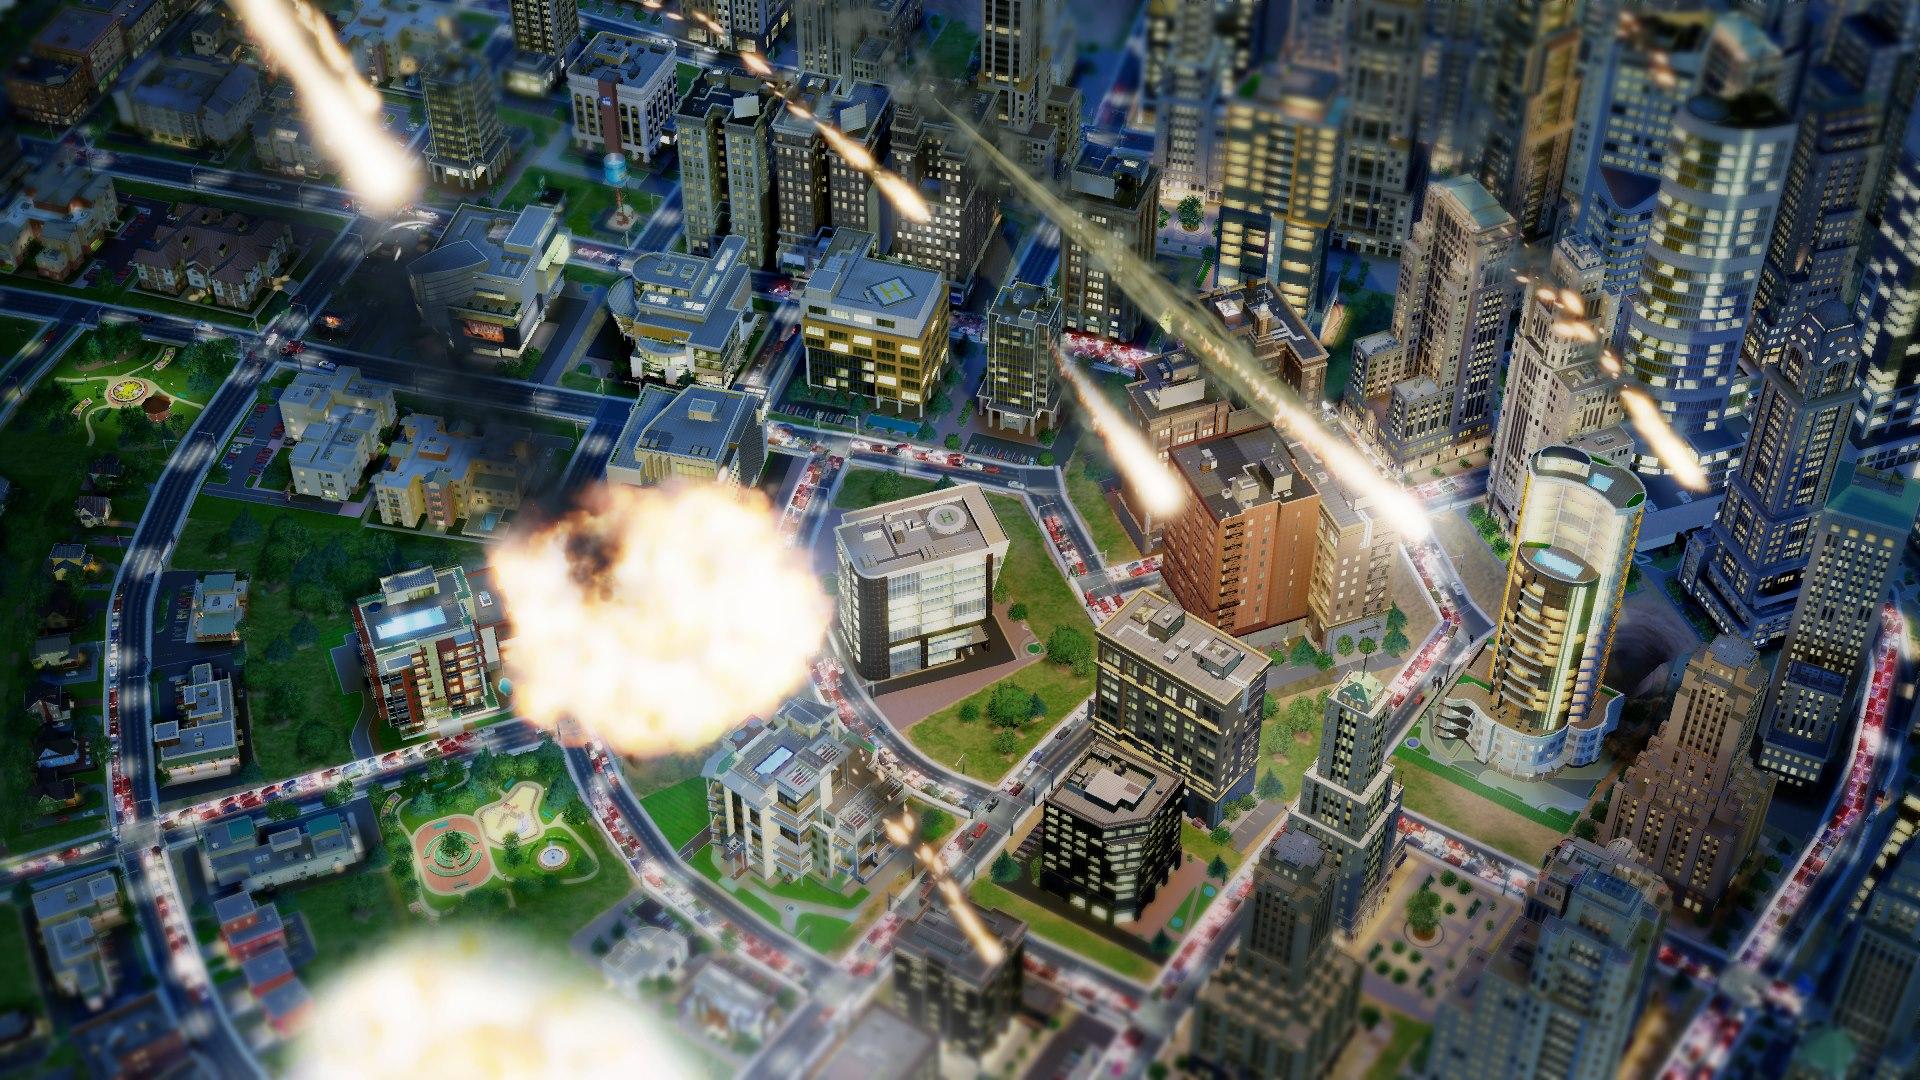 EA closes SimCity studio Maxis after years